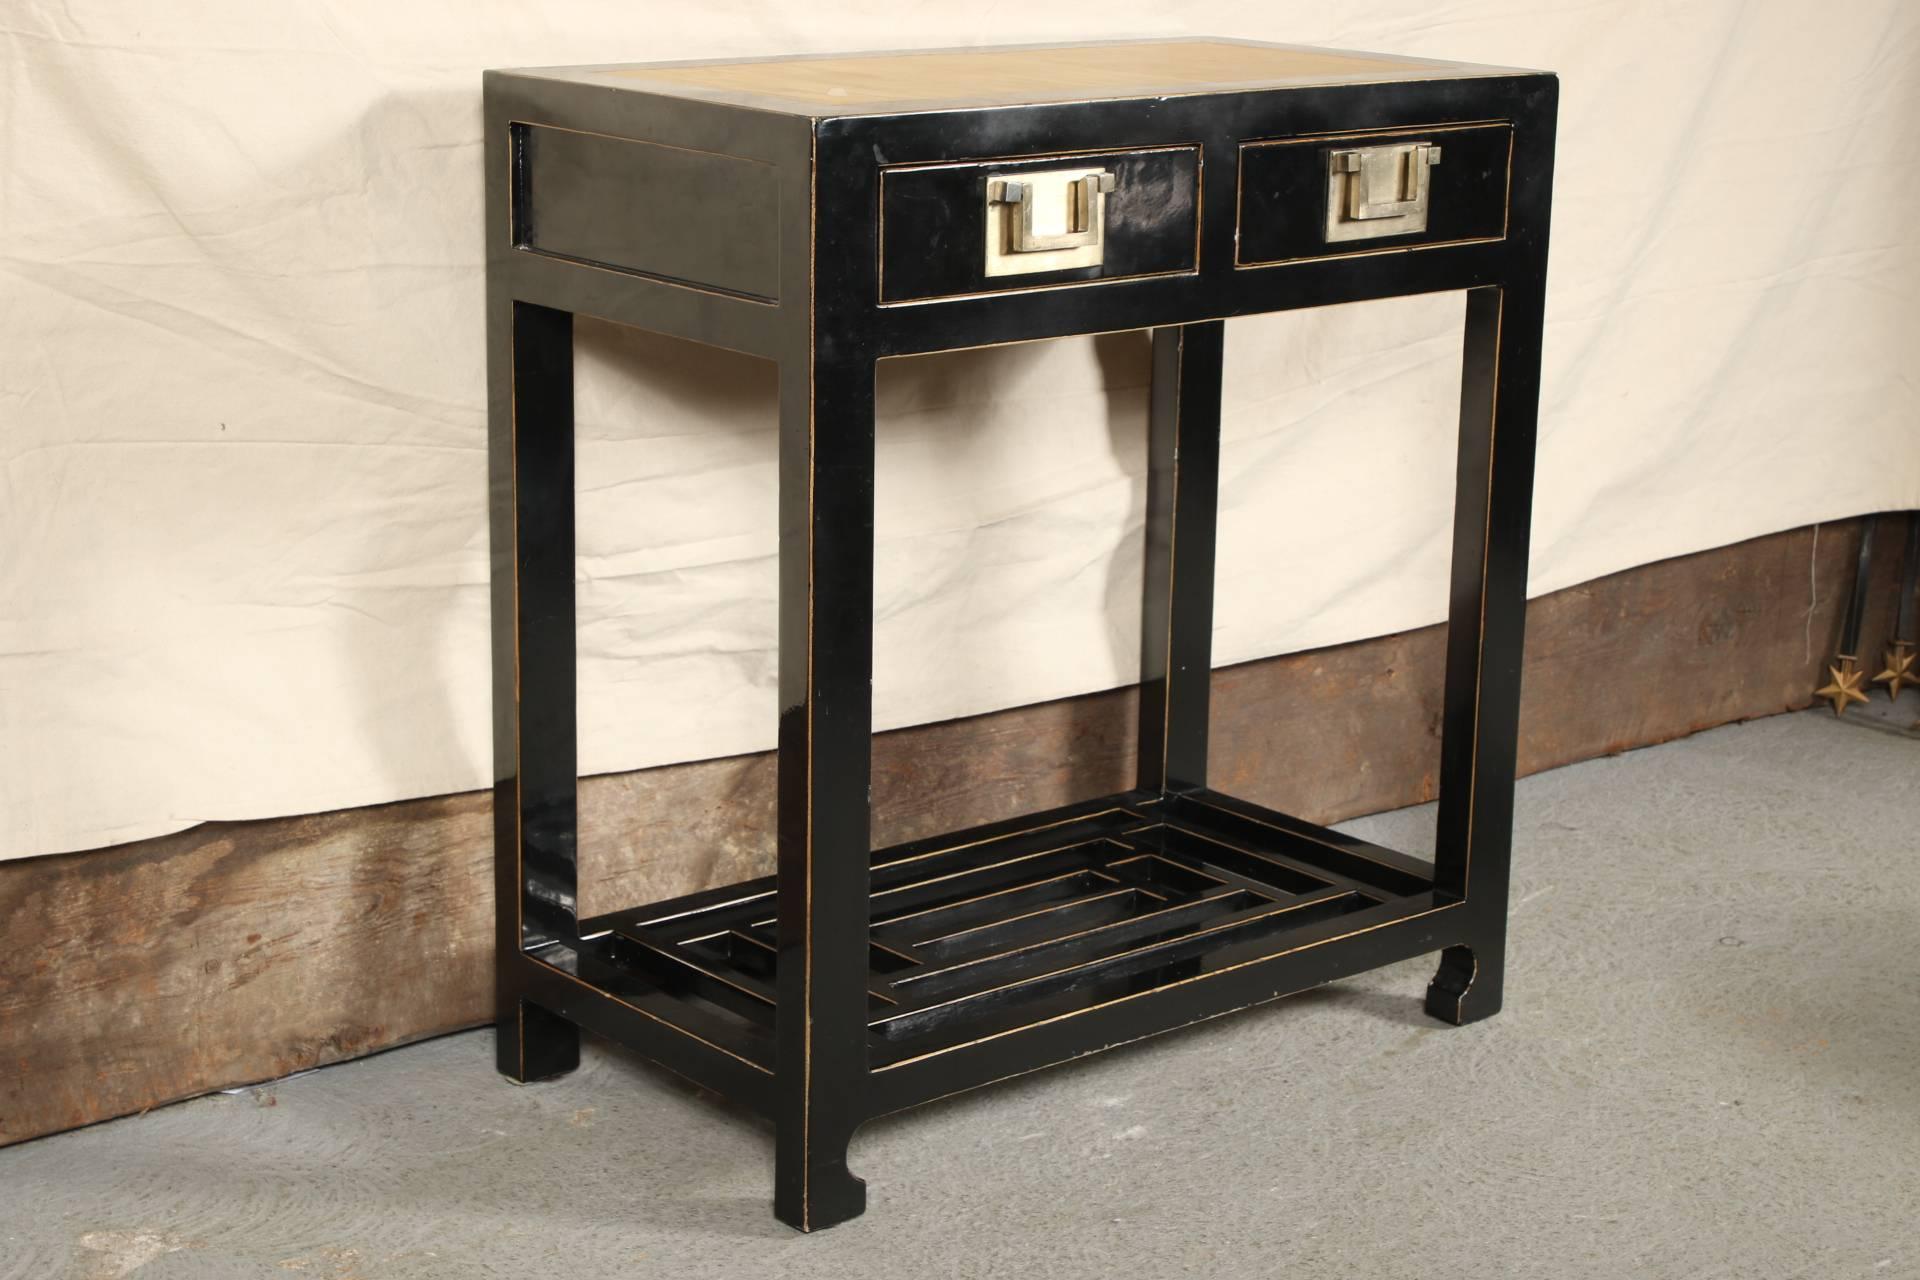 From ABC Carpet and Home. Rectangular with two apron drawers with squared brass handle pulls and an inset bamboo panel on top. The sides and back with recessed panels. The base with a large geometric design openwork stretcher.
Condition: Pale